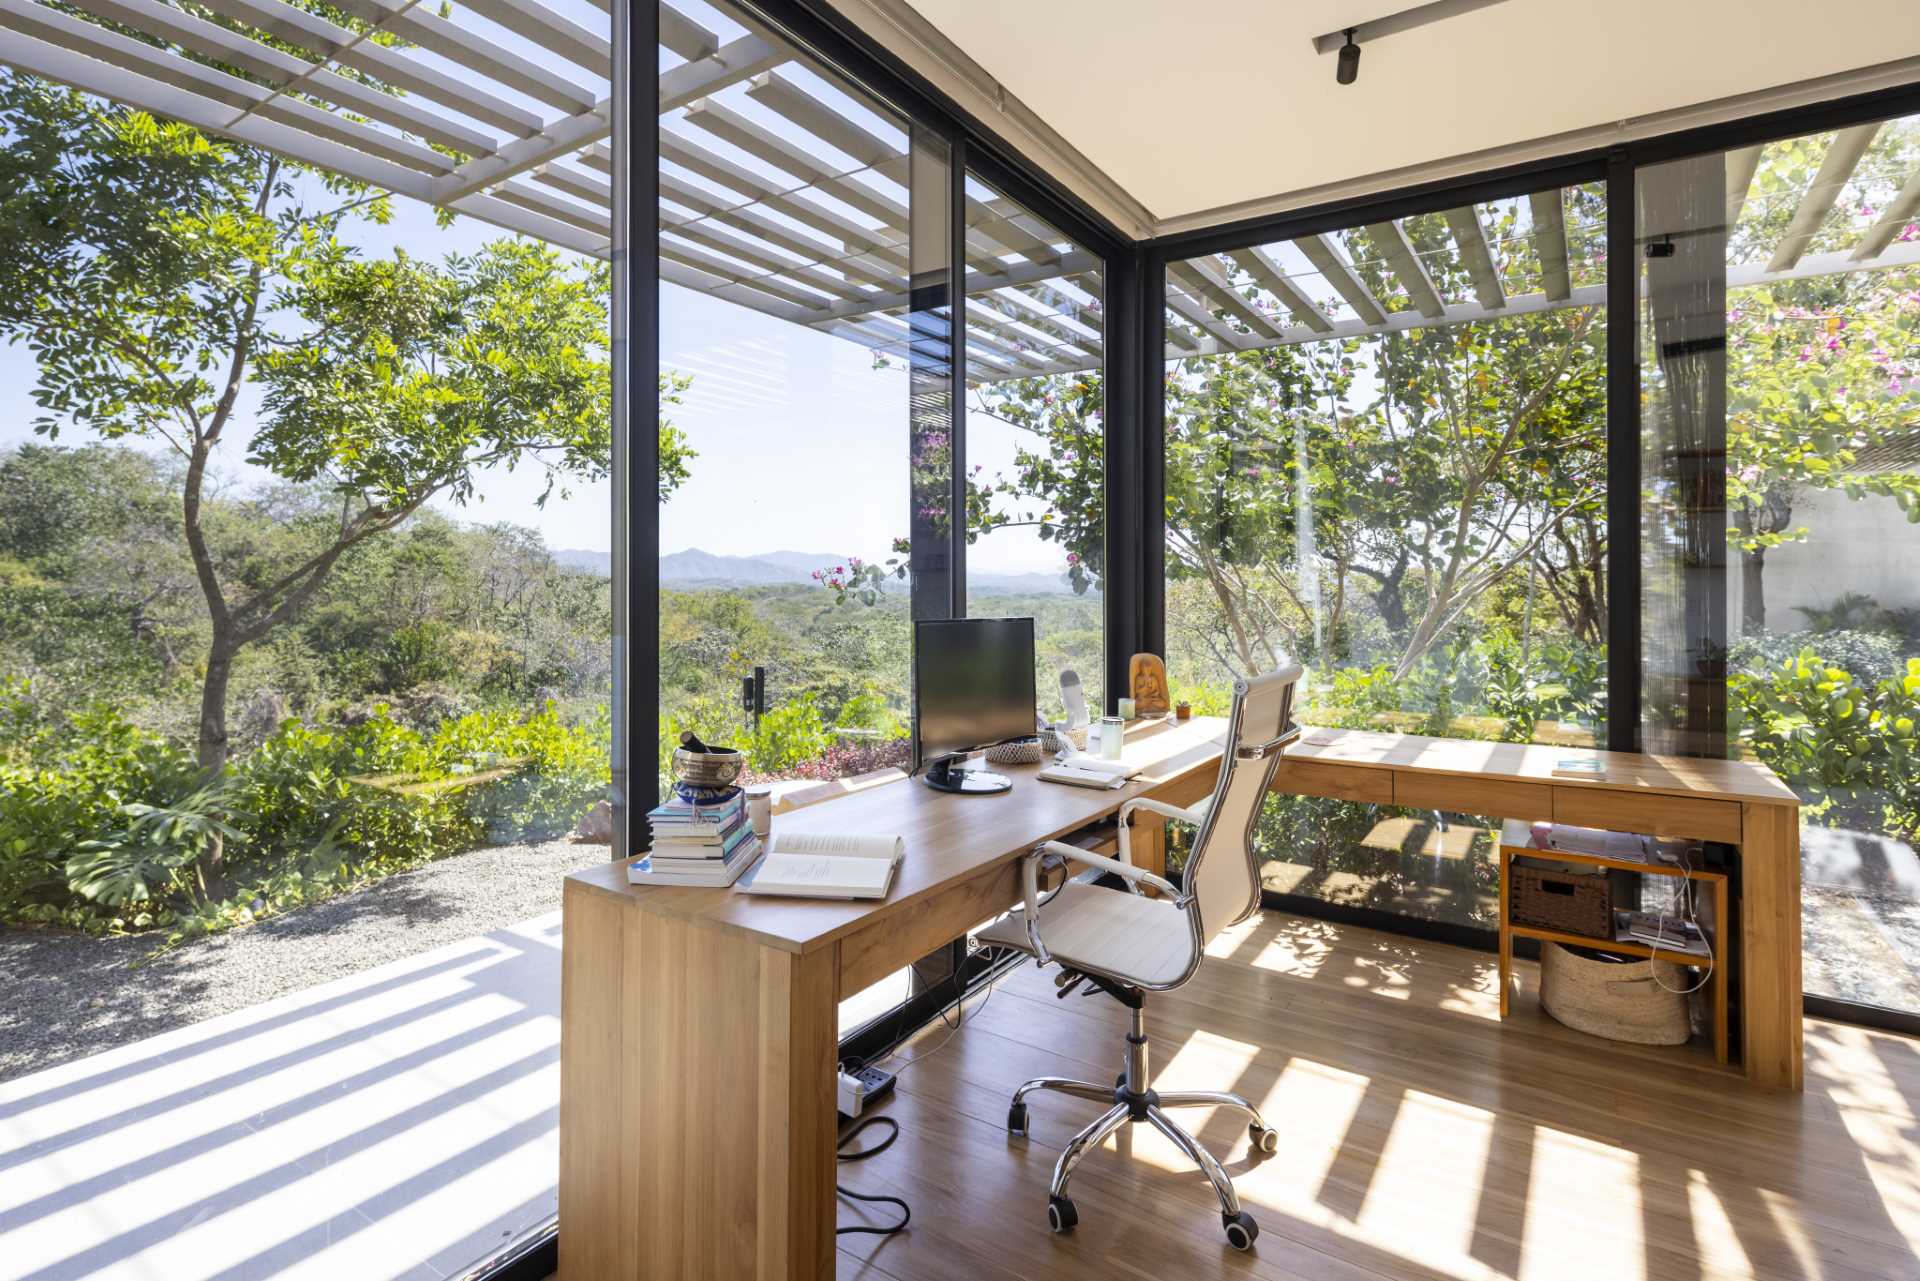 In a home office, a desk is positioned in front of floor-to-ceiling black-framed windows with views of the landscape.